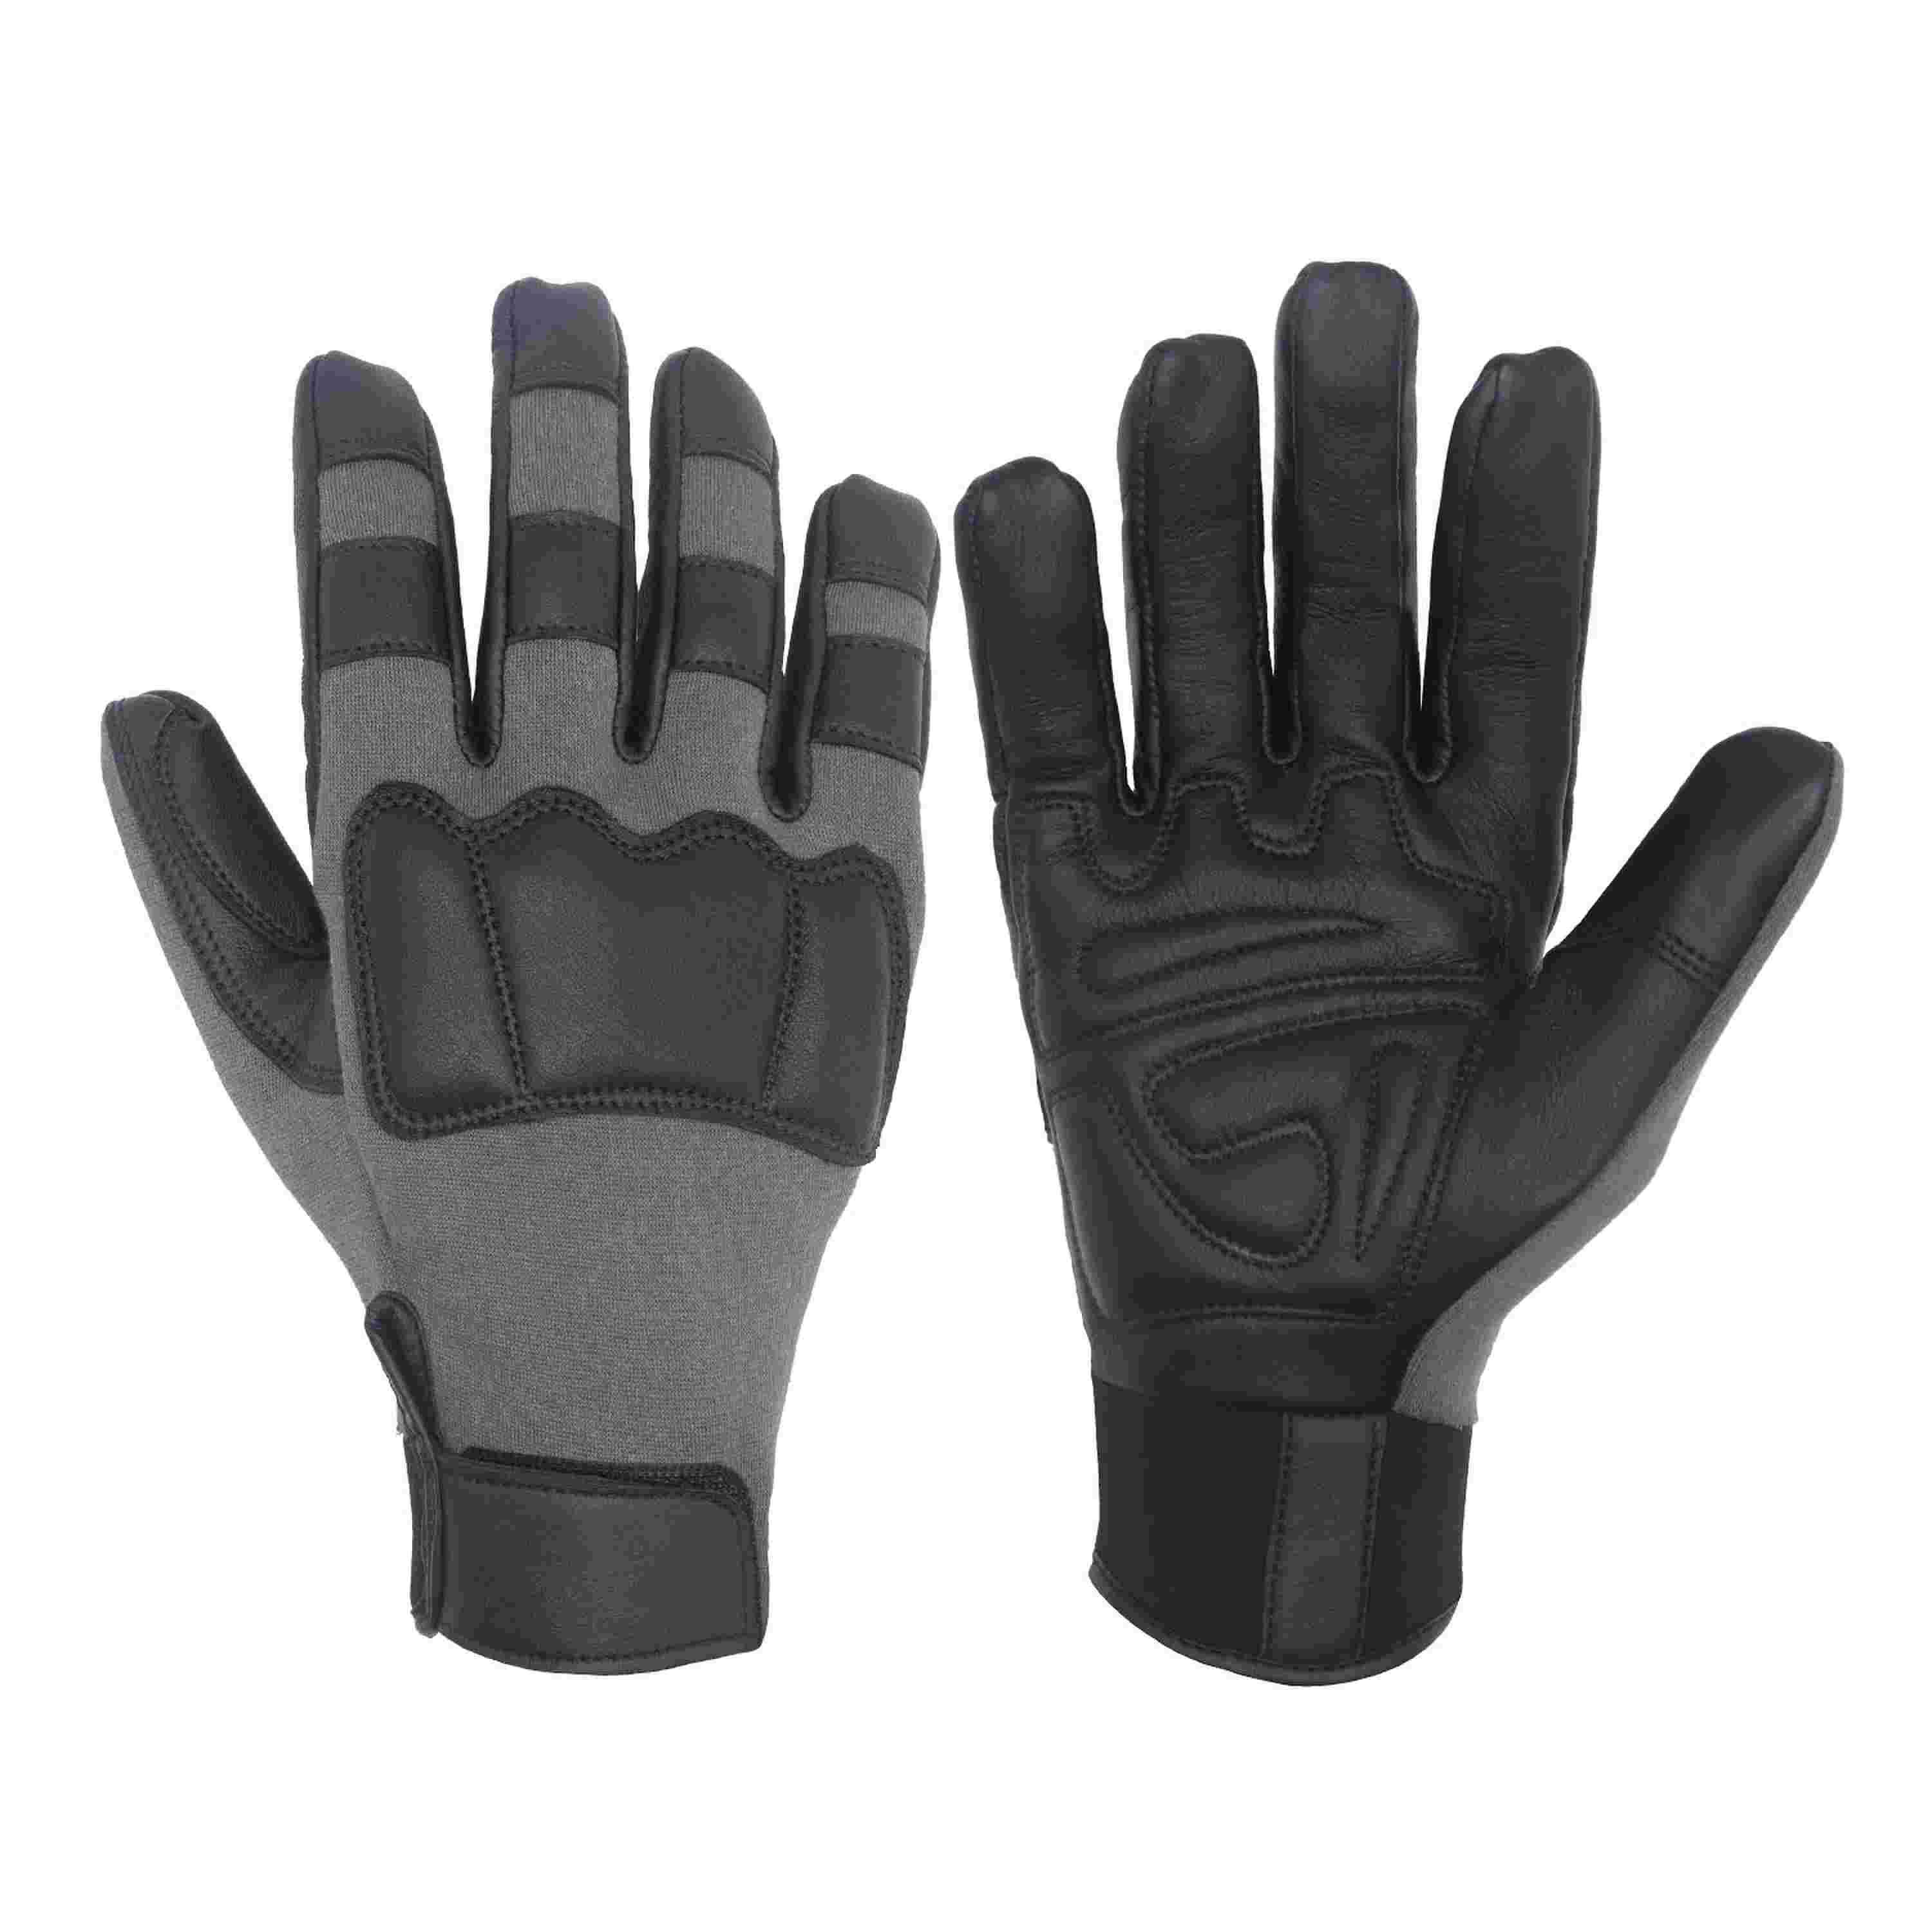 S699 PRISAFETY HIGH Dexterity goatskin foam padded knuckle tactical gloves hunting leather gloves